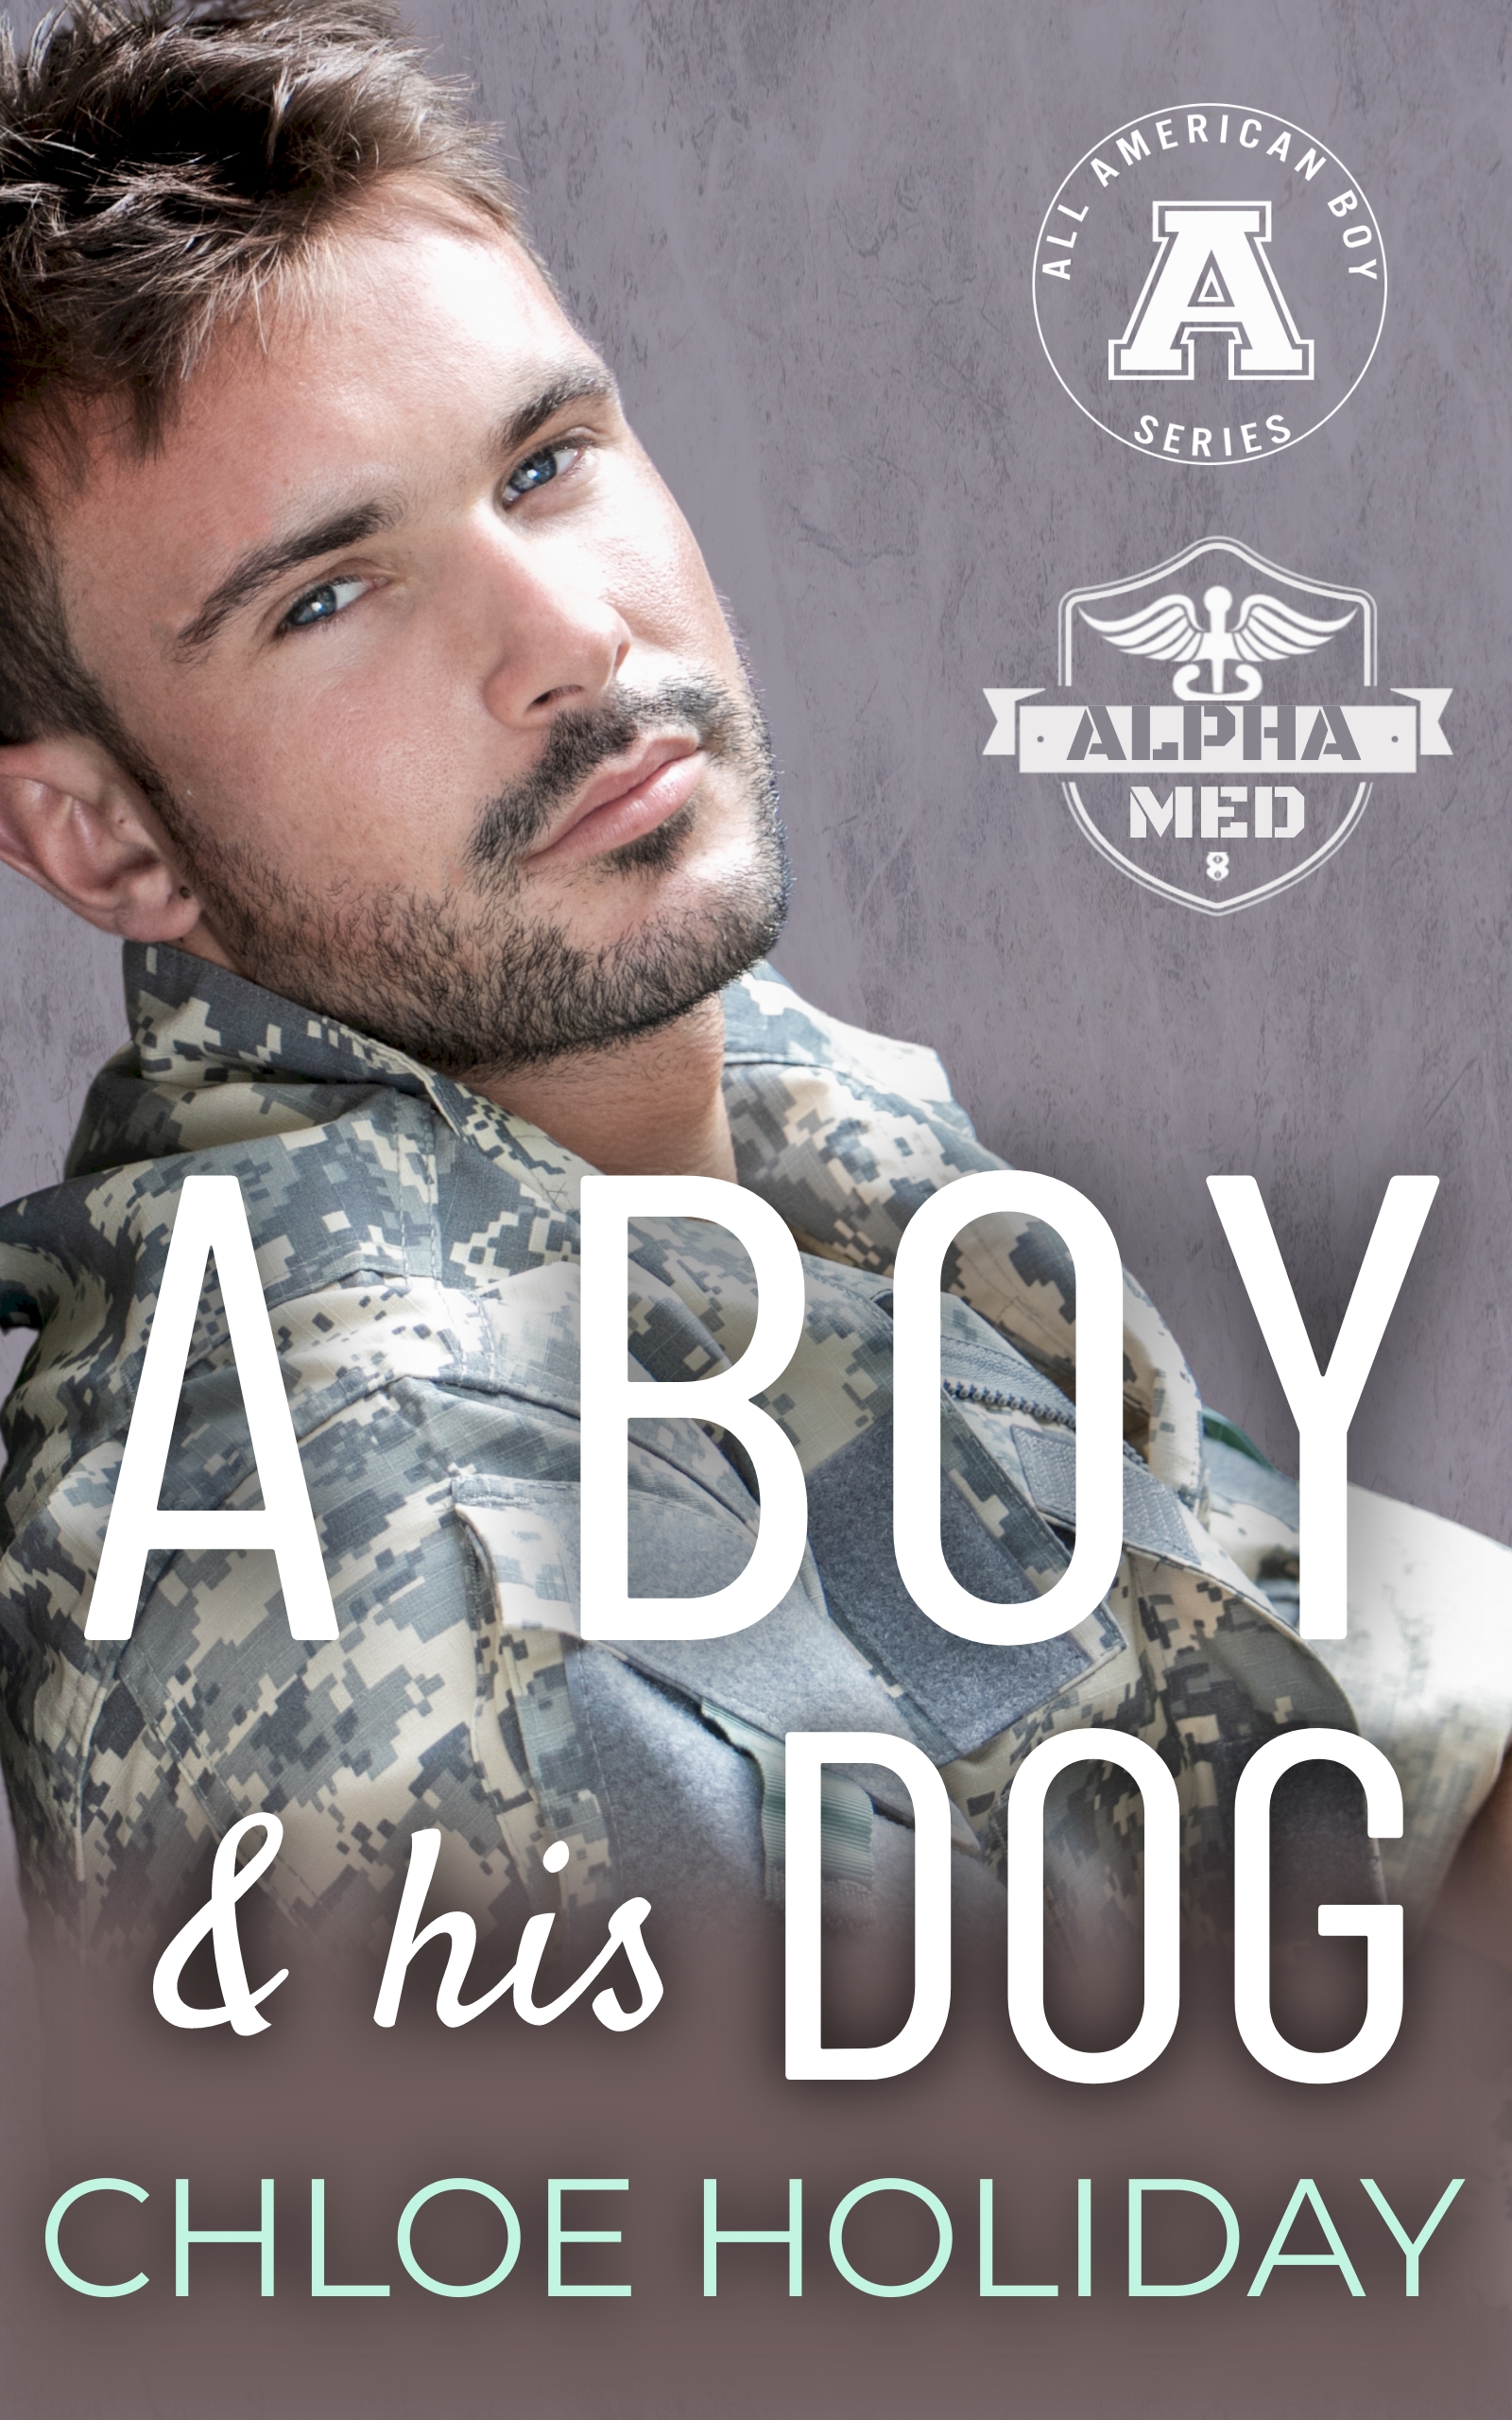 Chloe Holiday's romantic suspense novel, A Boy & his Dog, is a story about a military bomb tech and a young medical resident and the dog they both love.